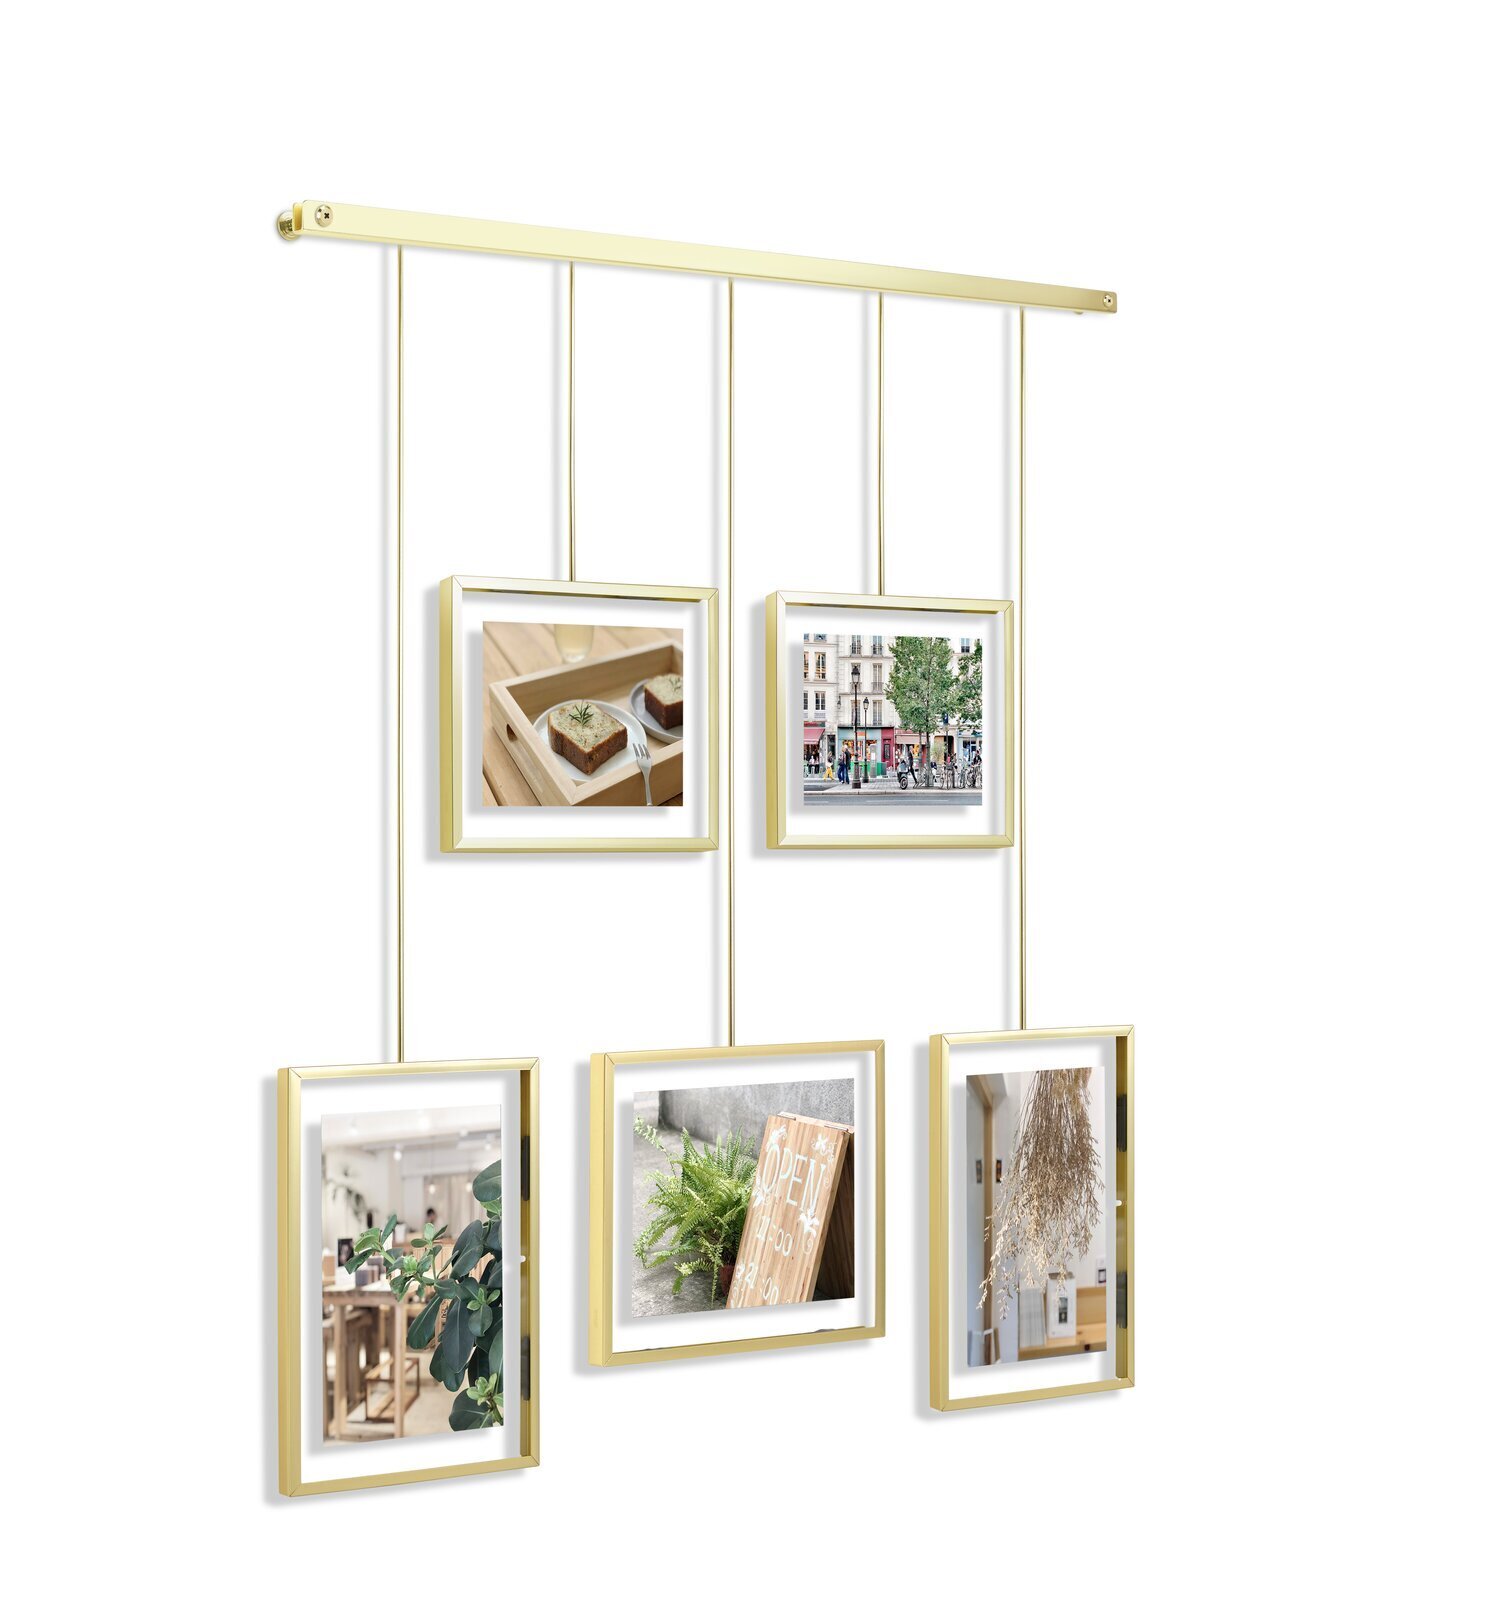 9 Patterm Photo Frames Hanging Family Love Collage Picture Aperture Home Decor 